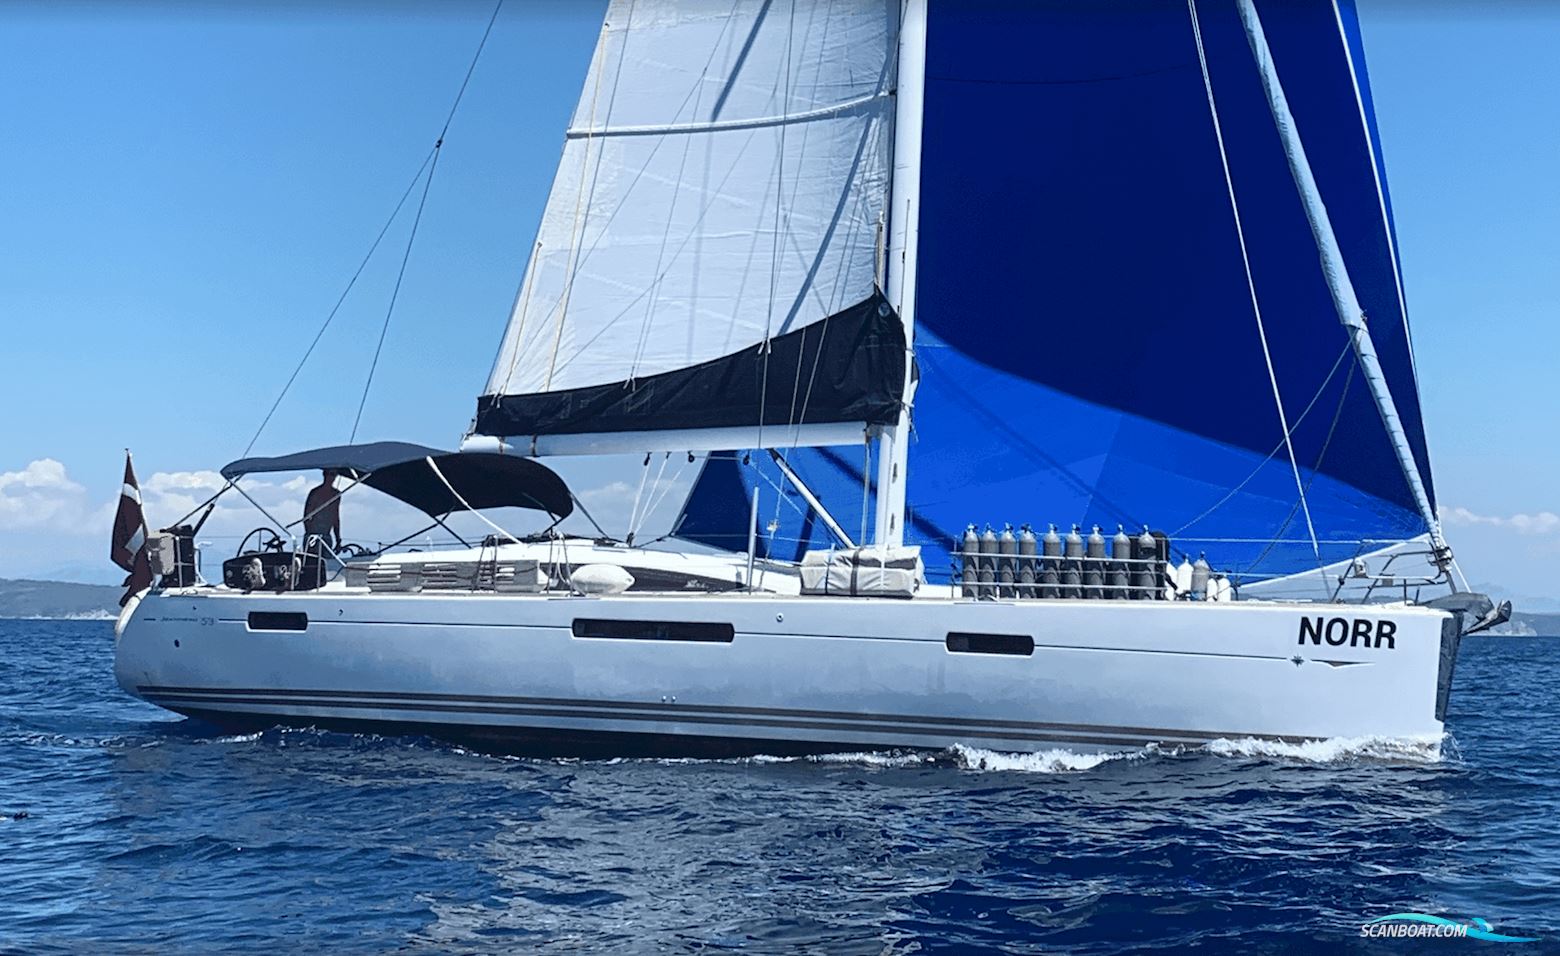 Jeanneau 53 Sailing boat 2010, with Yanmar engine, No country info